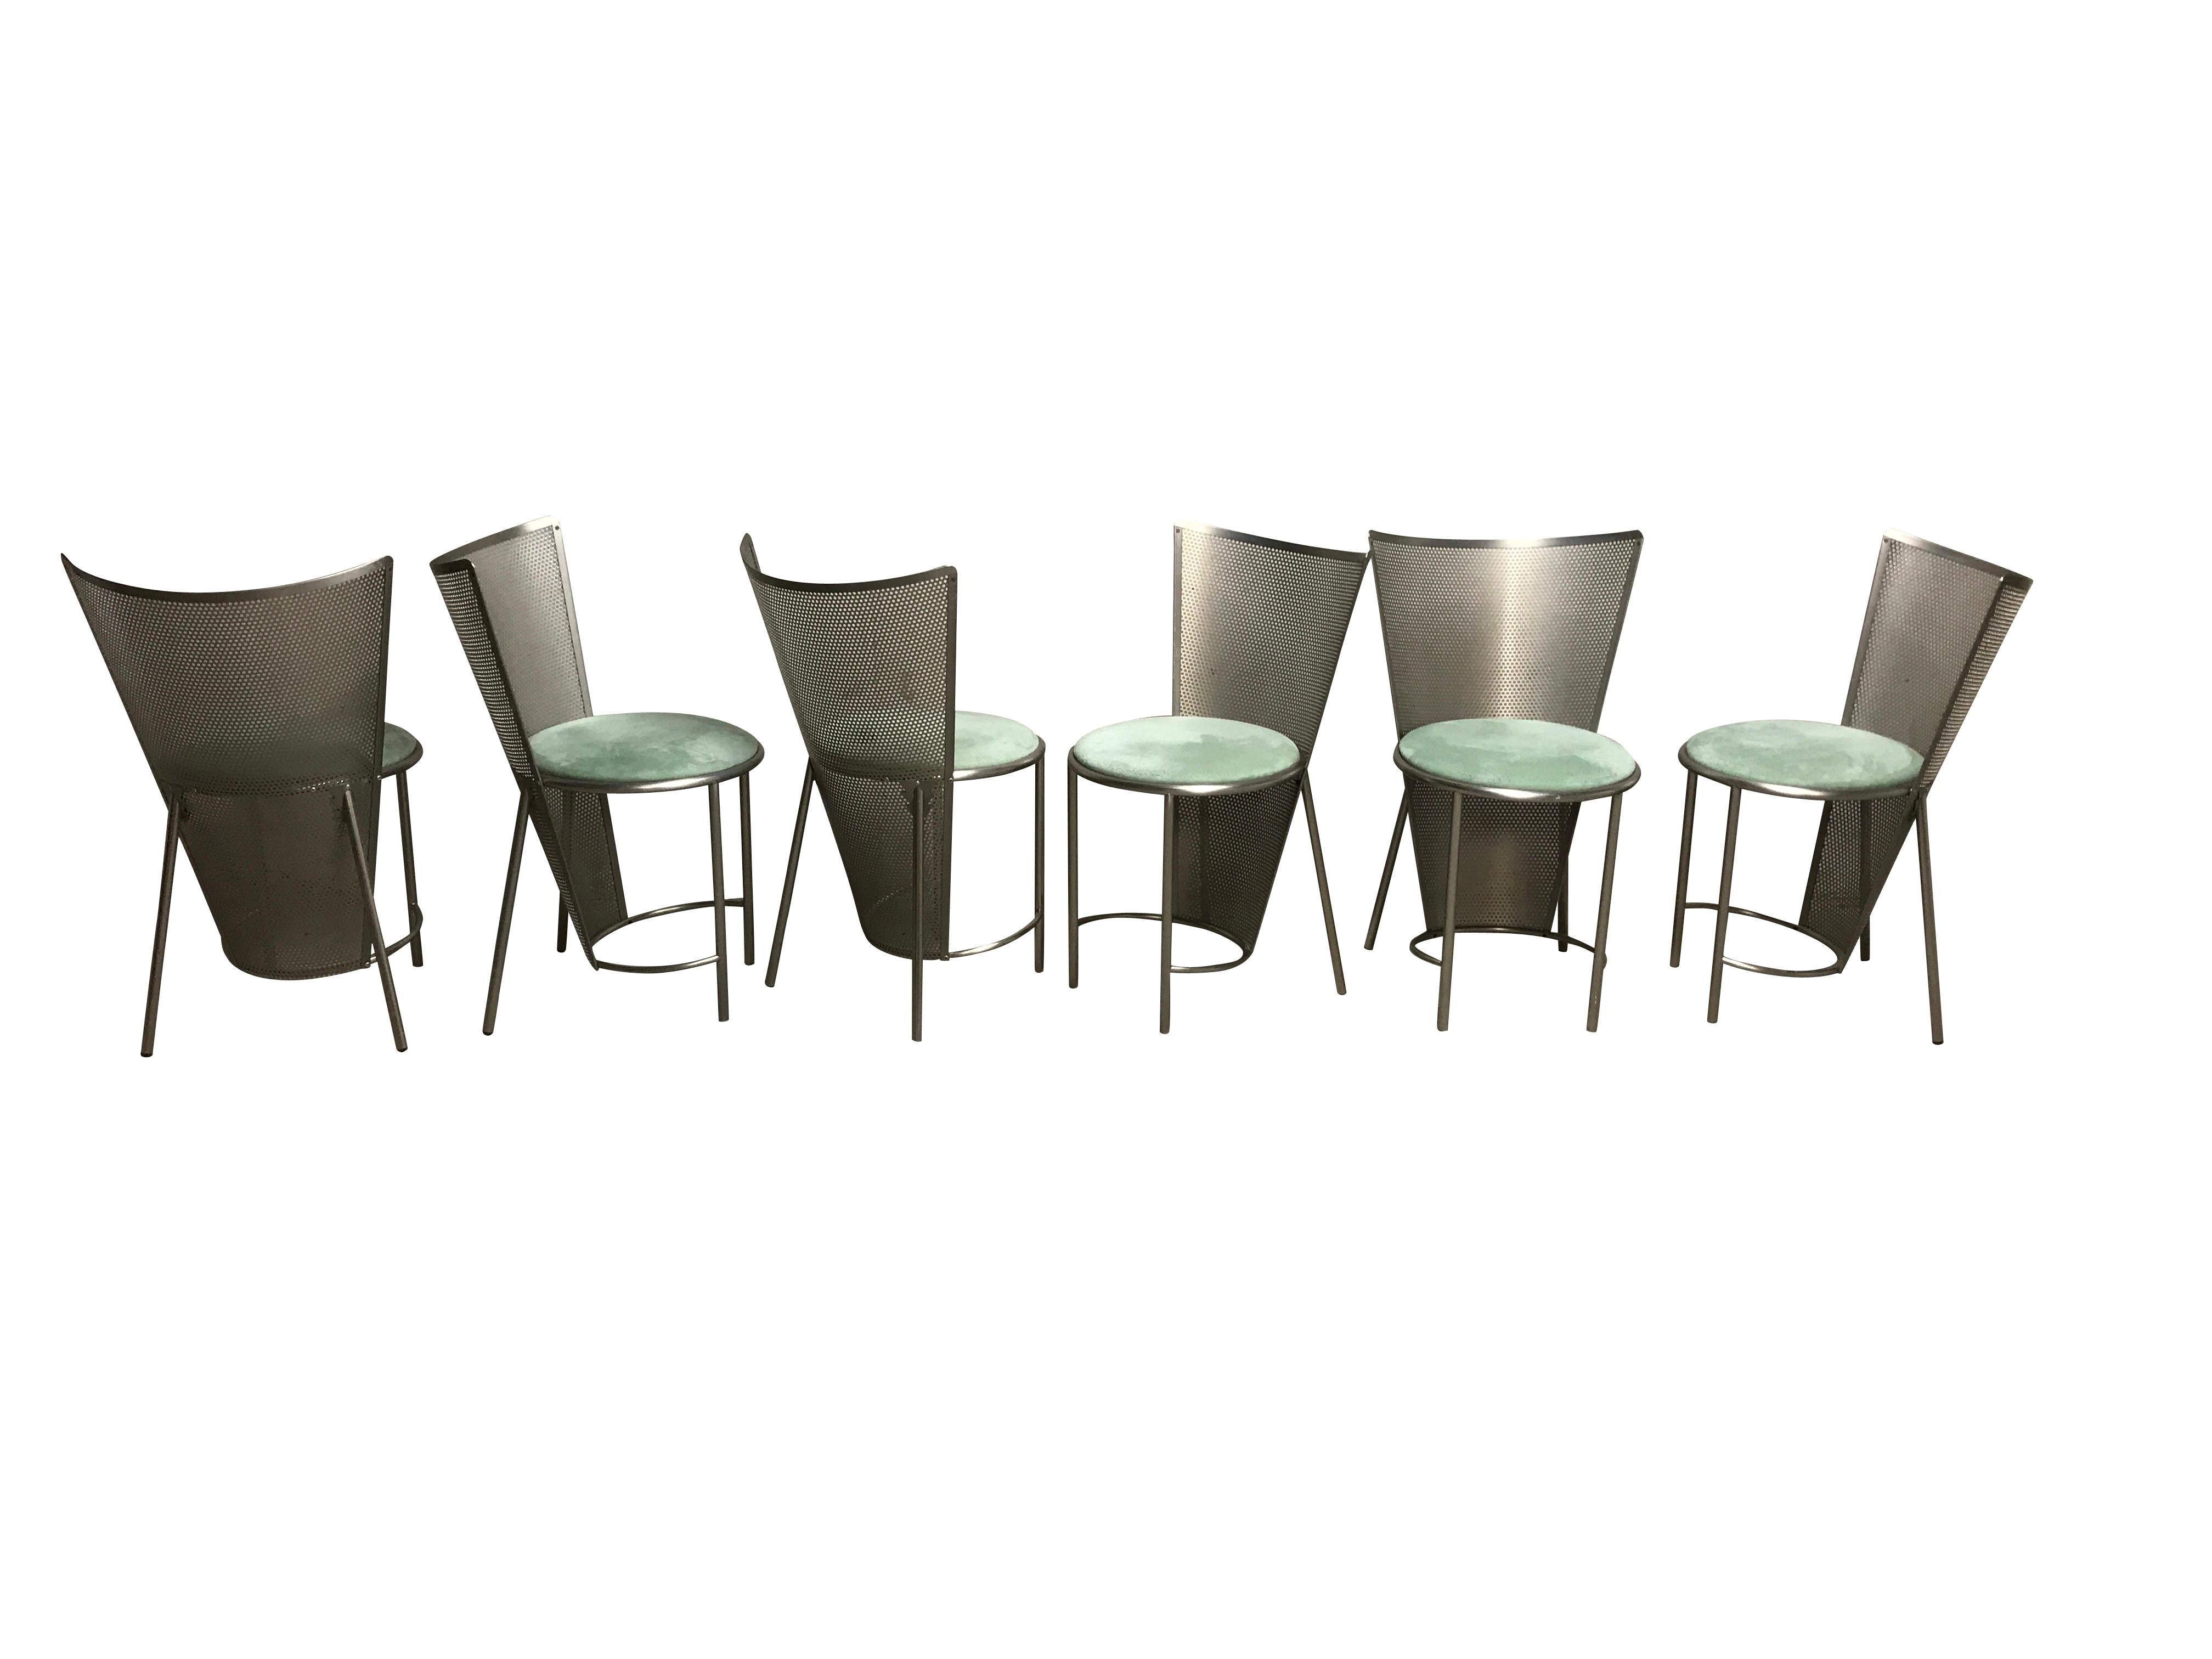 Set of six perforated metal dining chairs designed by Frans Van Praet for belgochrom.

These chairs where designed for the world expo of 1992 in Sevilla.

The chairs have a beautiful geometric design and the seats have new green alcantara